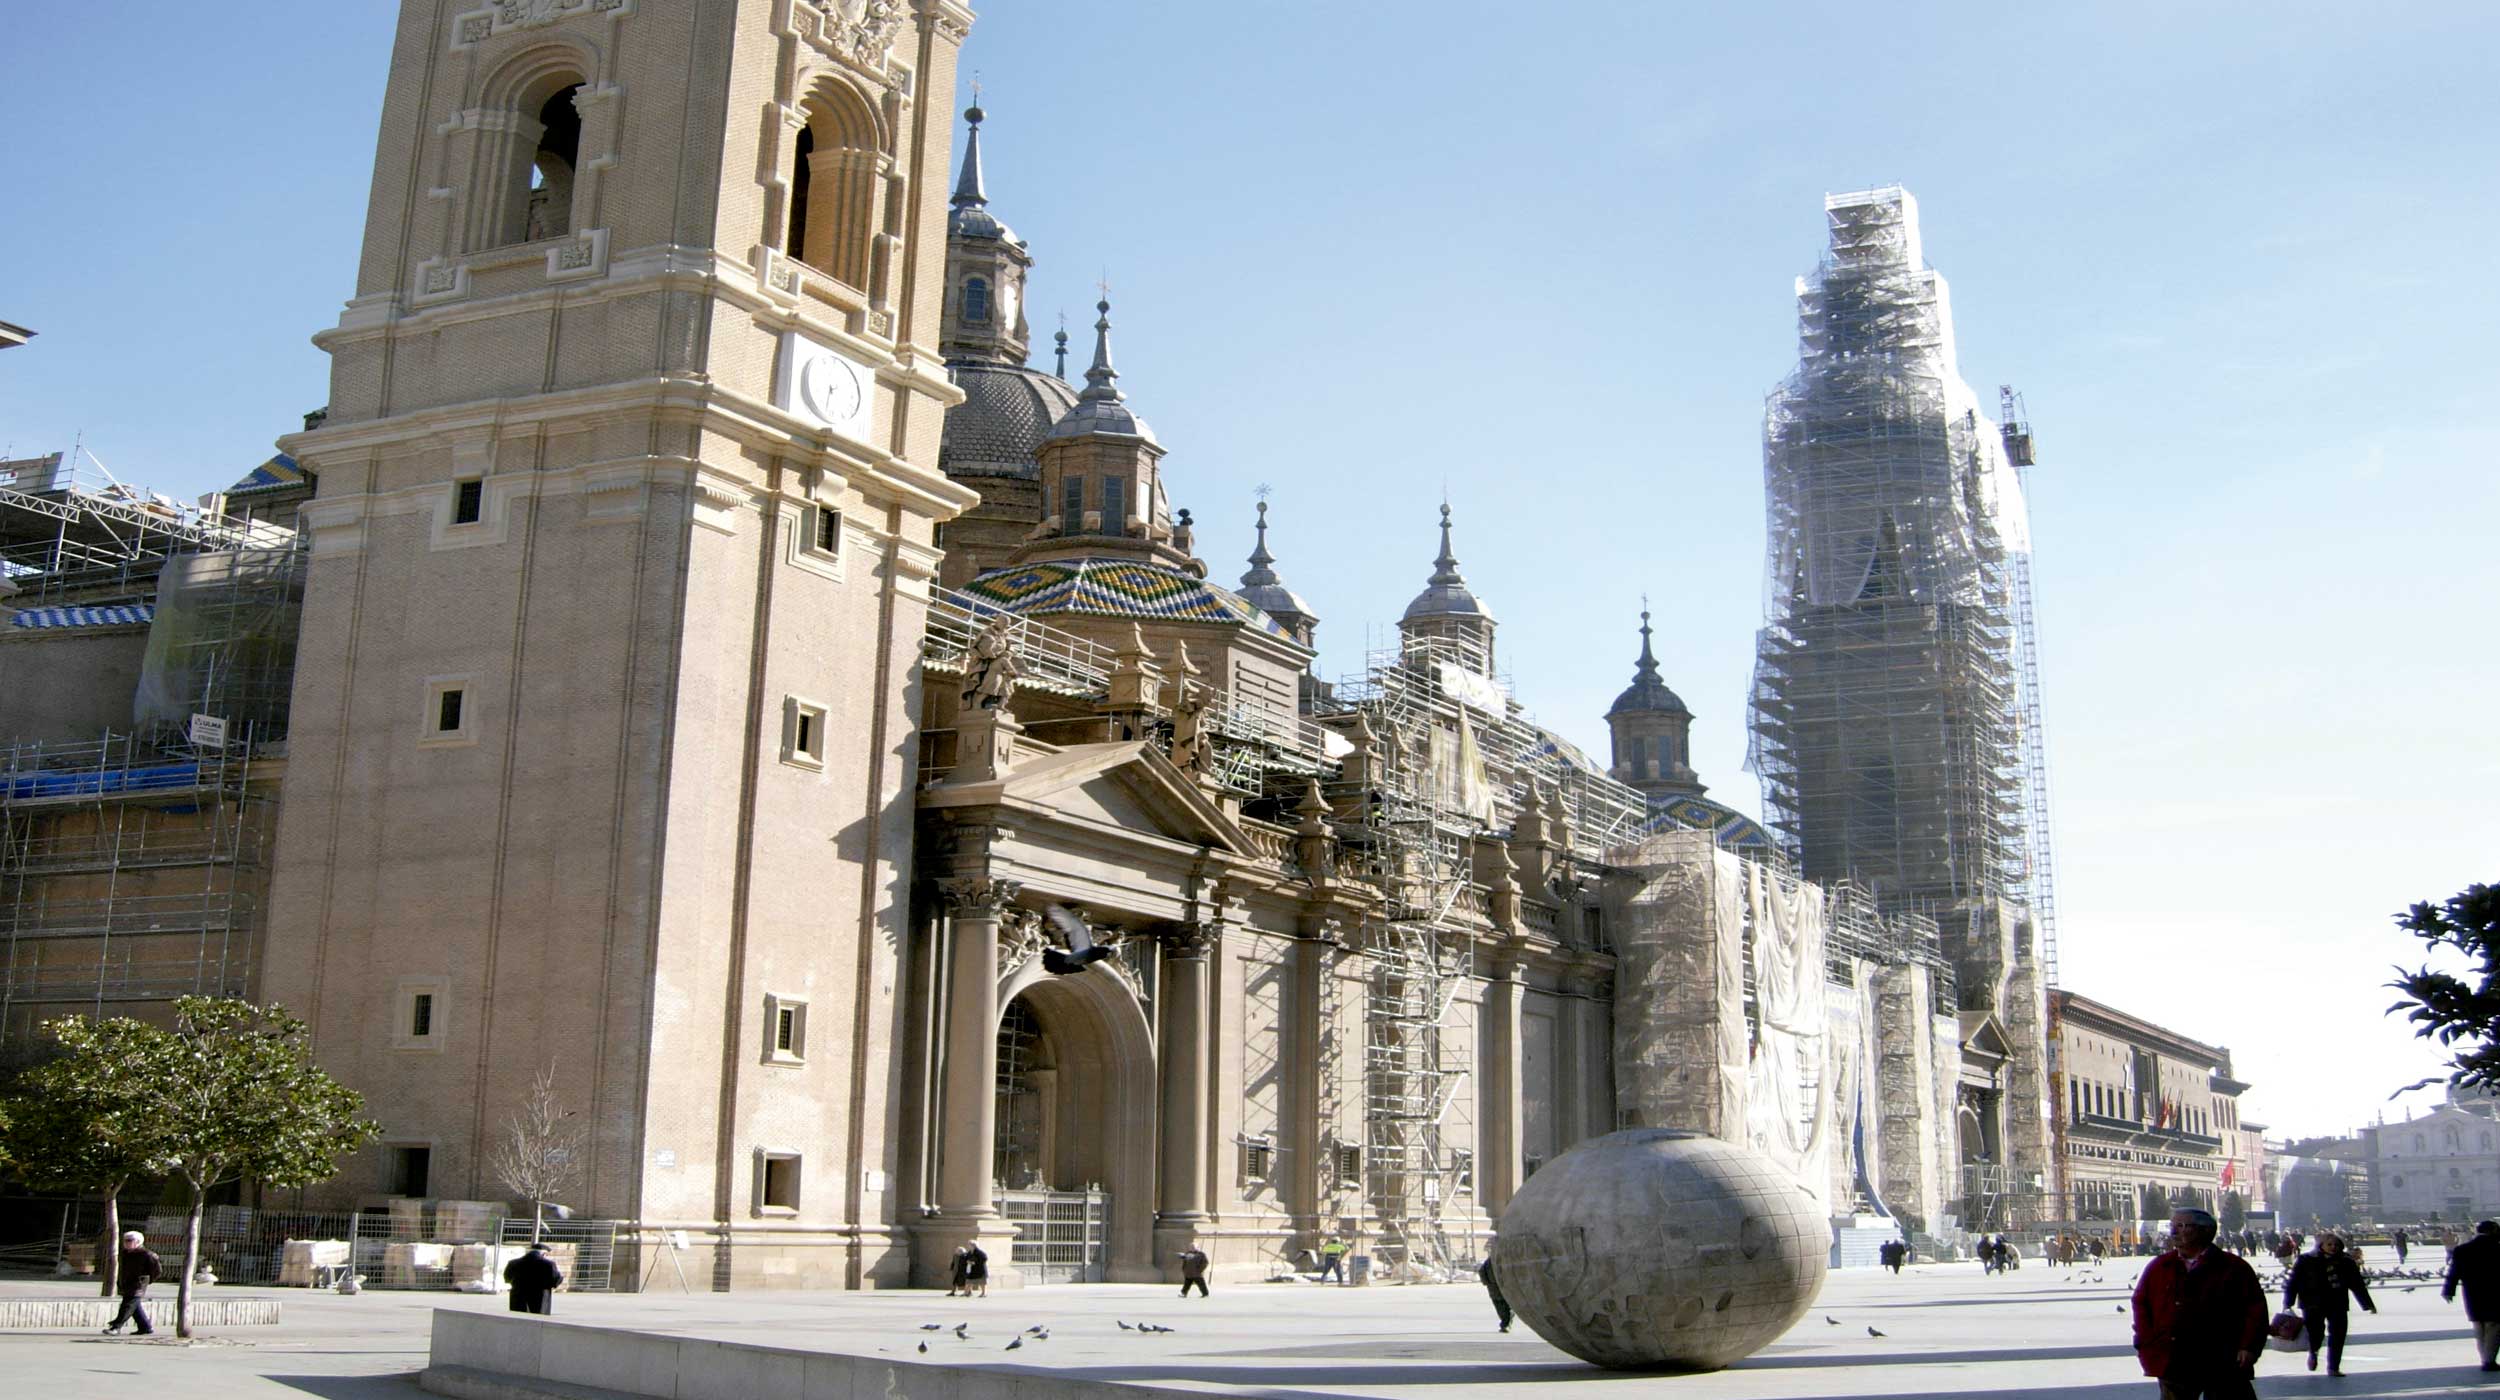 The work for the Basilica del Pilar’s comprehensive restoration, of medieval origin, has been carried out since 2005.